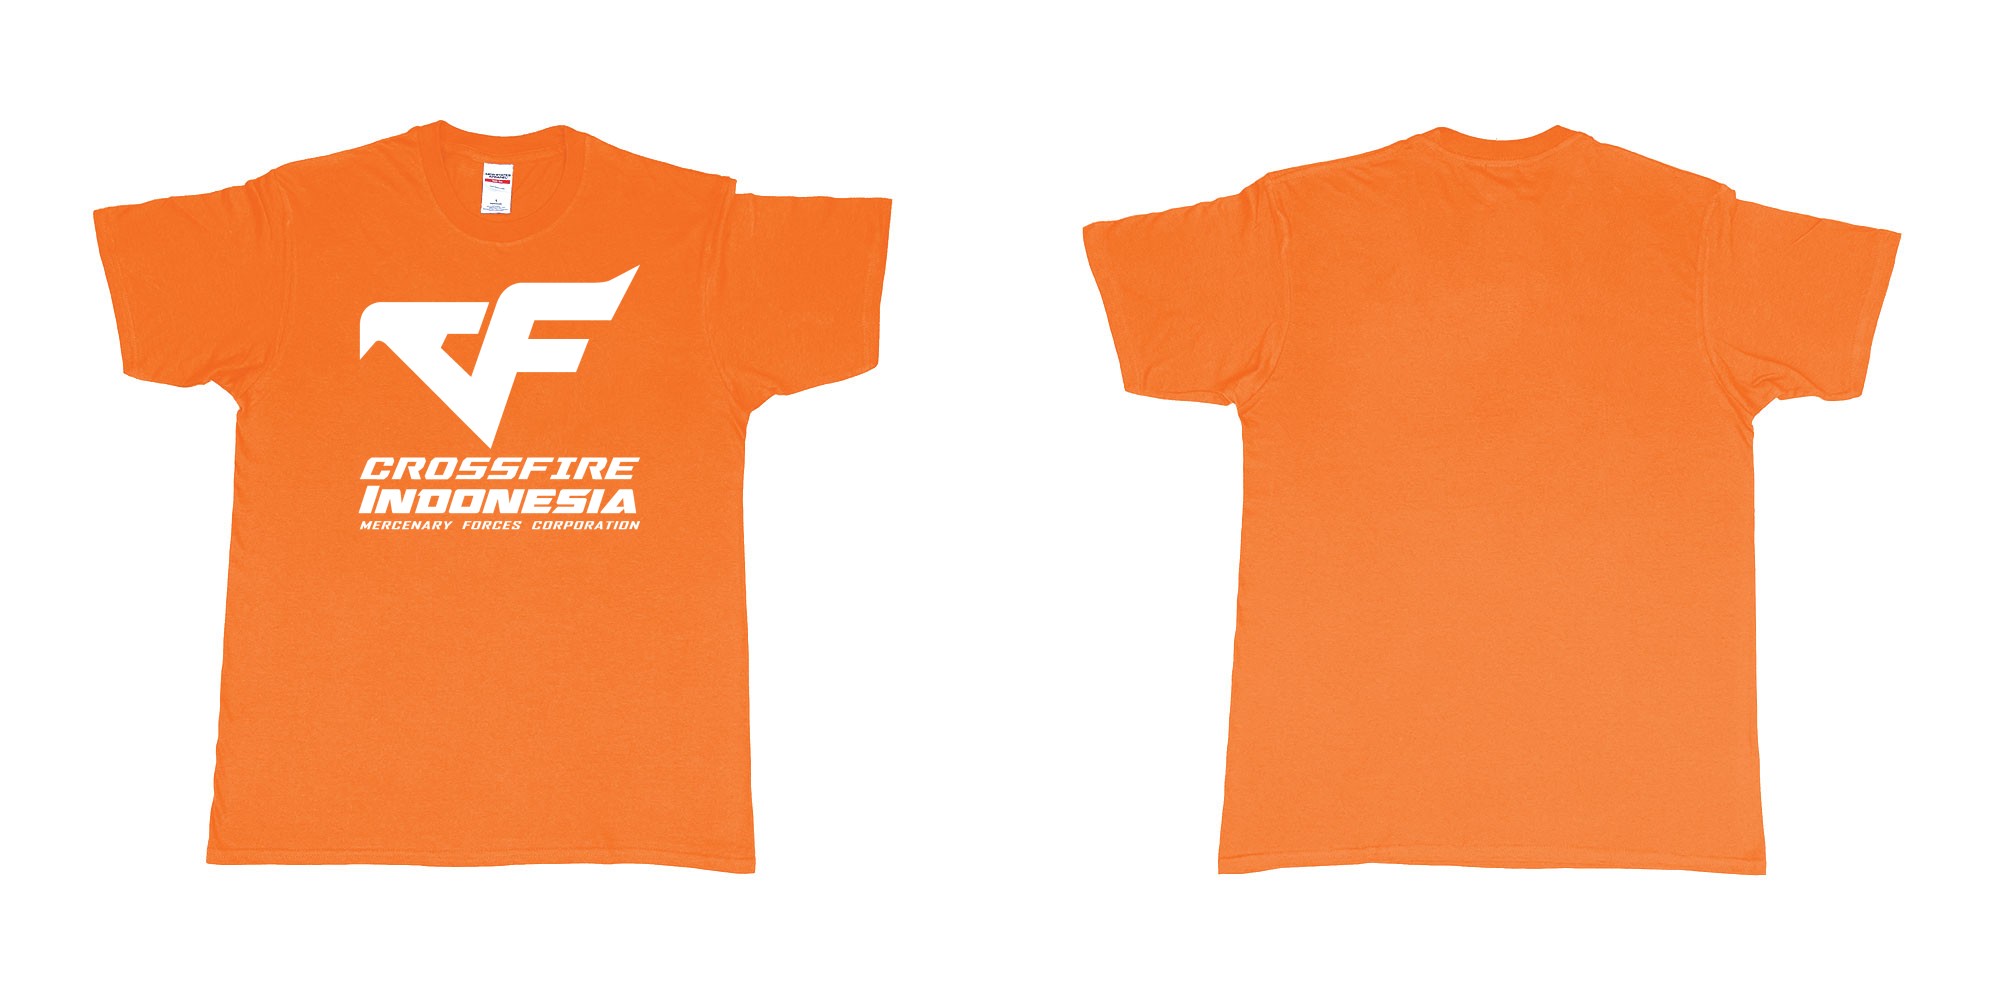 Custom tshirt design crossfire indonesia cfindo in fabric color orange choice your own text made in Bali by The Pirate Way